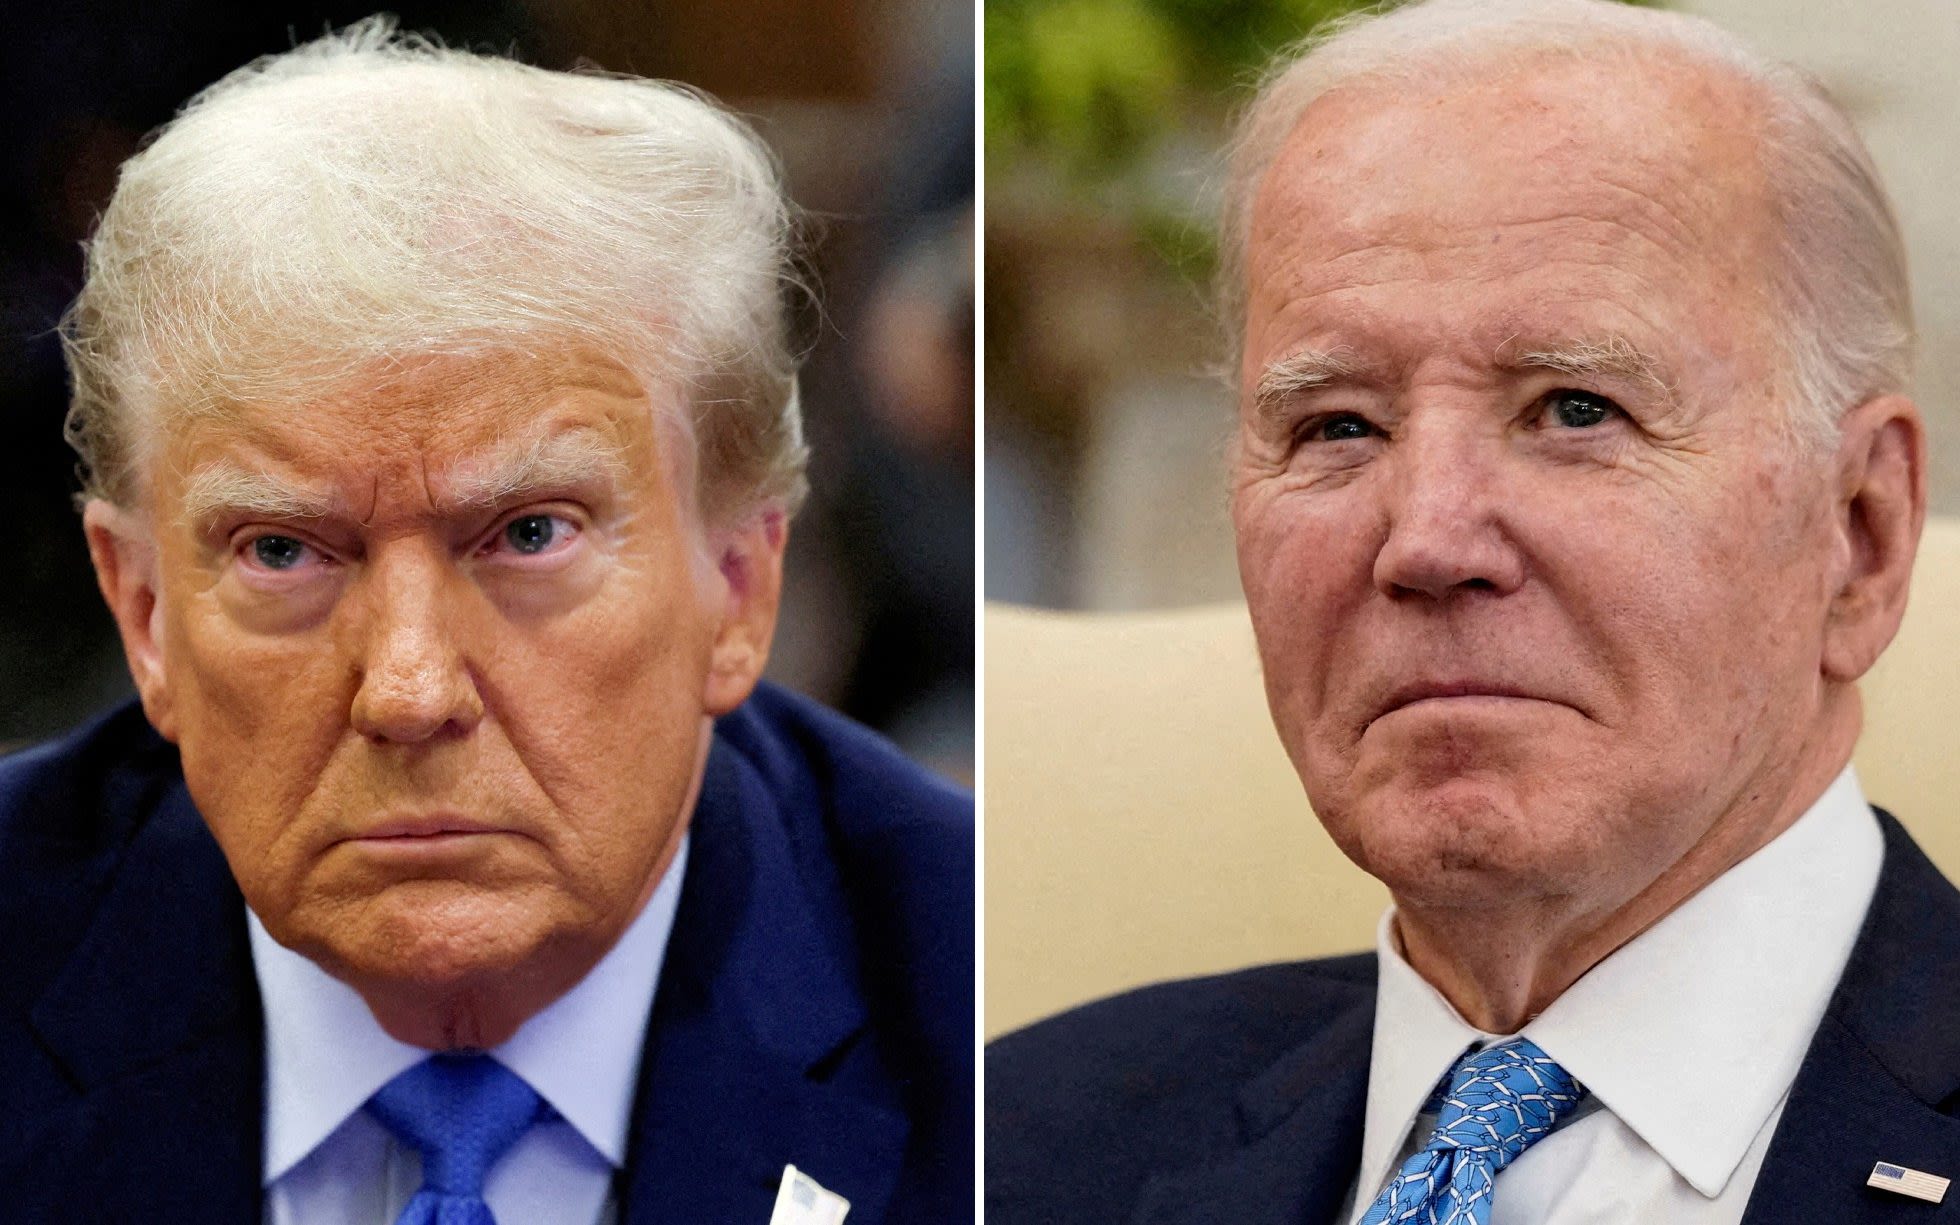 Biden closes gap in presidential poll as rival Trump is stuck in court